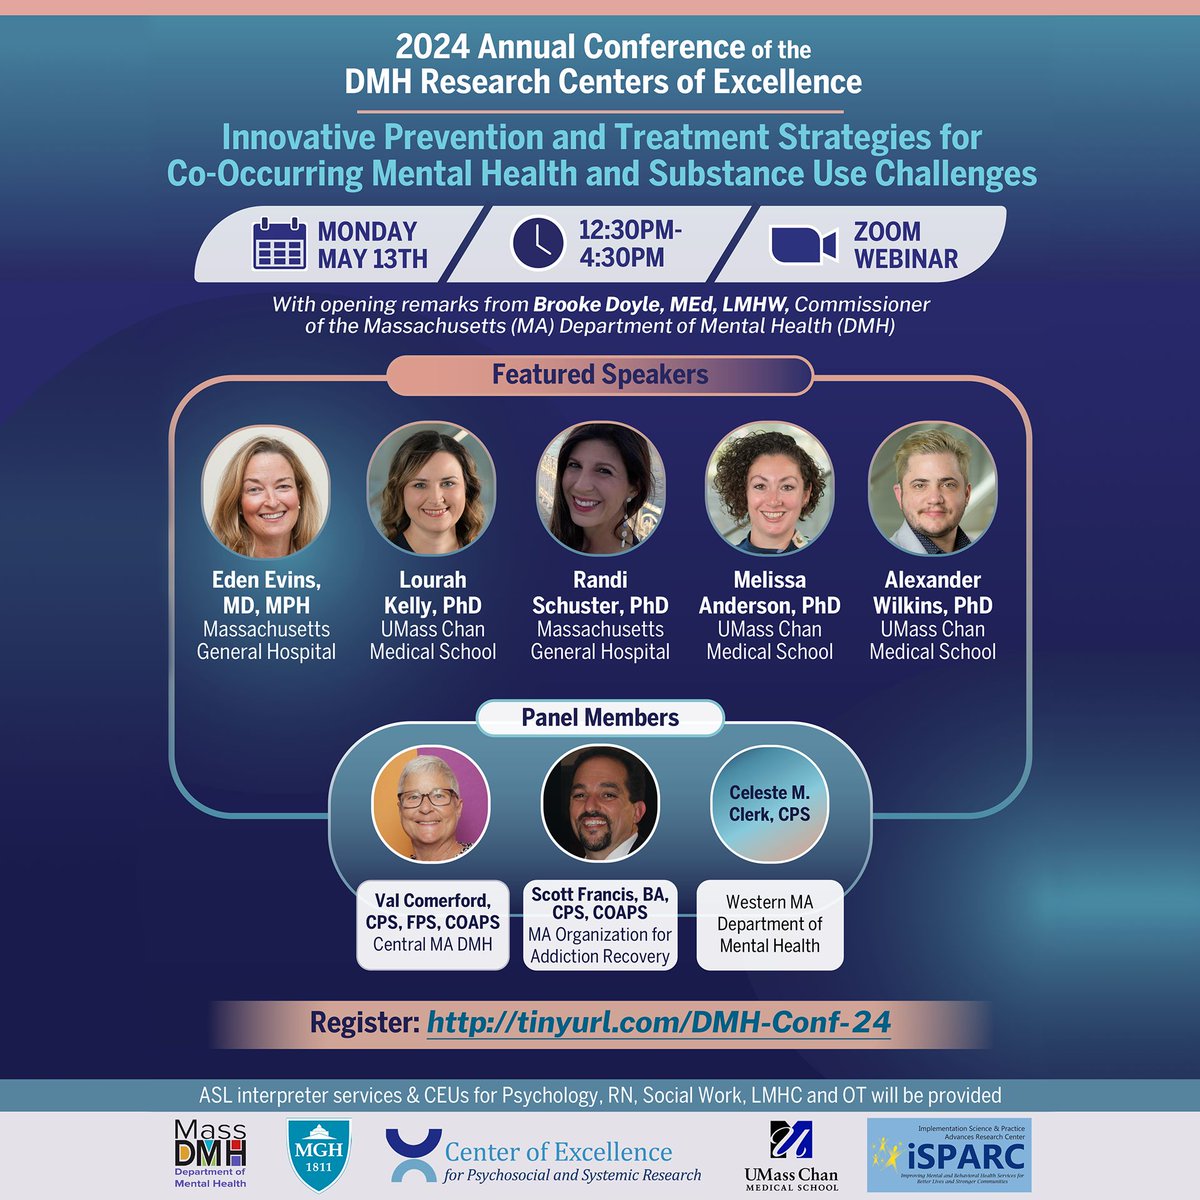 Register for the 2024 Annual @MassDMH Research Centers of Excellence Conference. Innovative Prevention & Treatment Strategies for Co-Occurring #MentalHealth & #SubstanceUse Challenges. buff.ly/3JdcbWh @MW_Convos @MassGeneralNews @NAMIMass @MassDPH @UMassChan #ImpSci